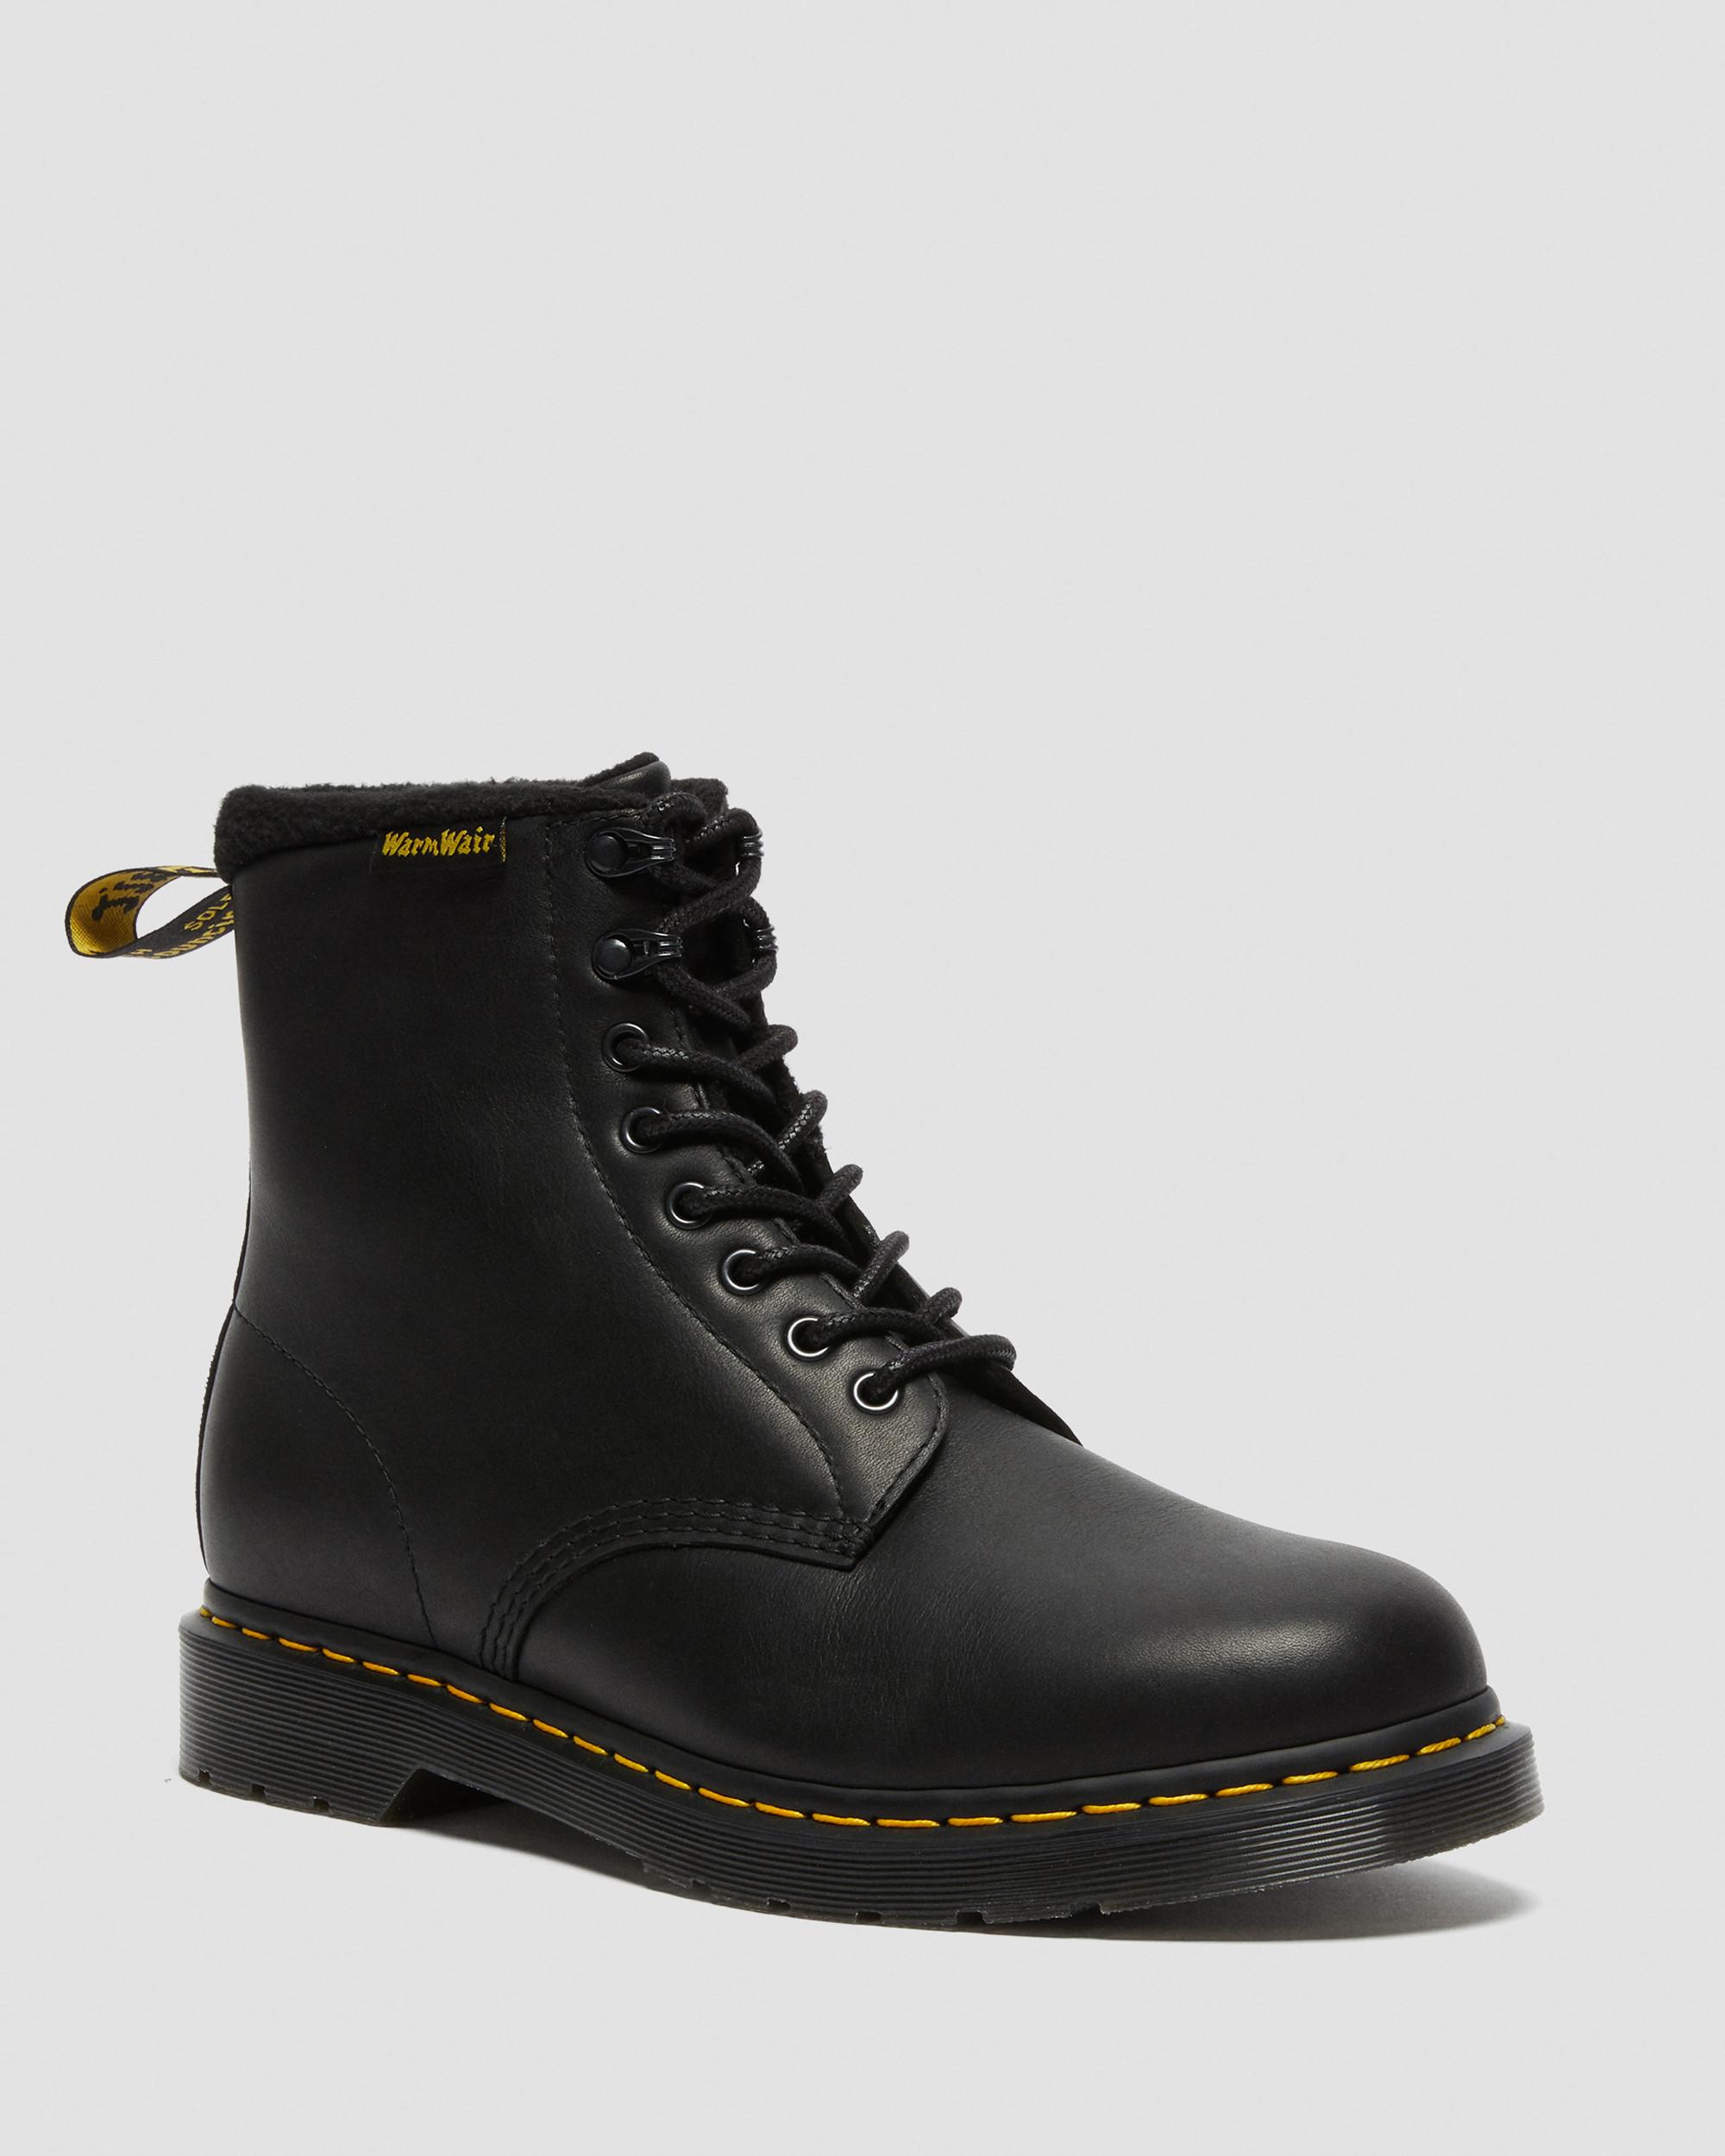 1460 Pascal Warmwair Valor Wp Leather Ankle Boots in Black